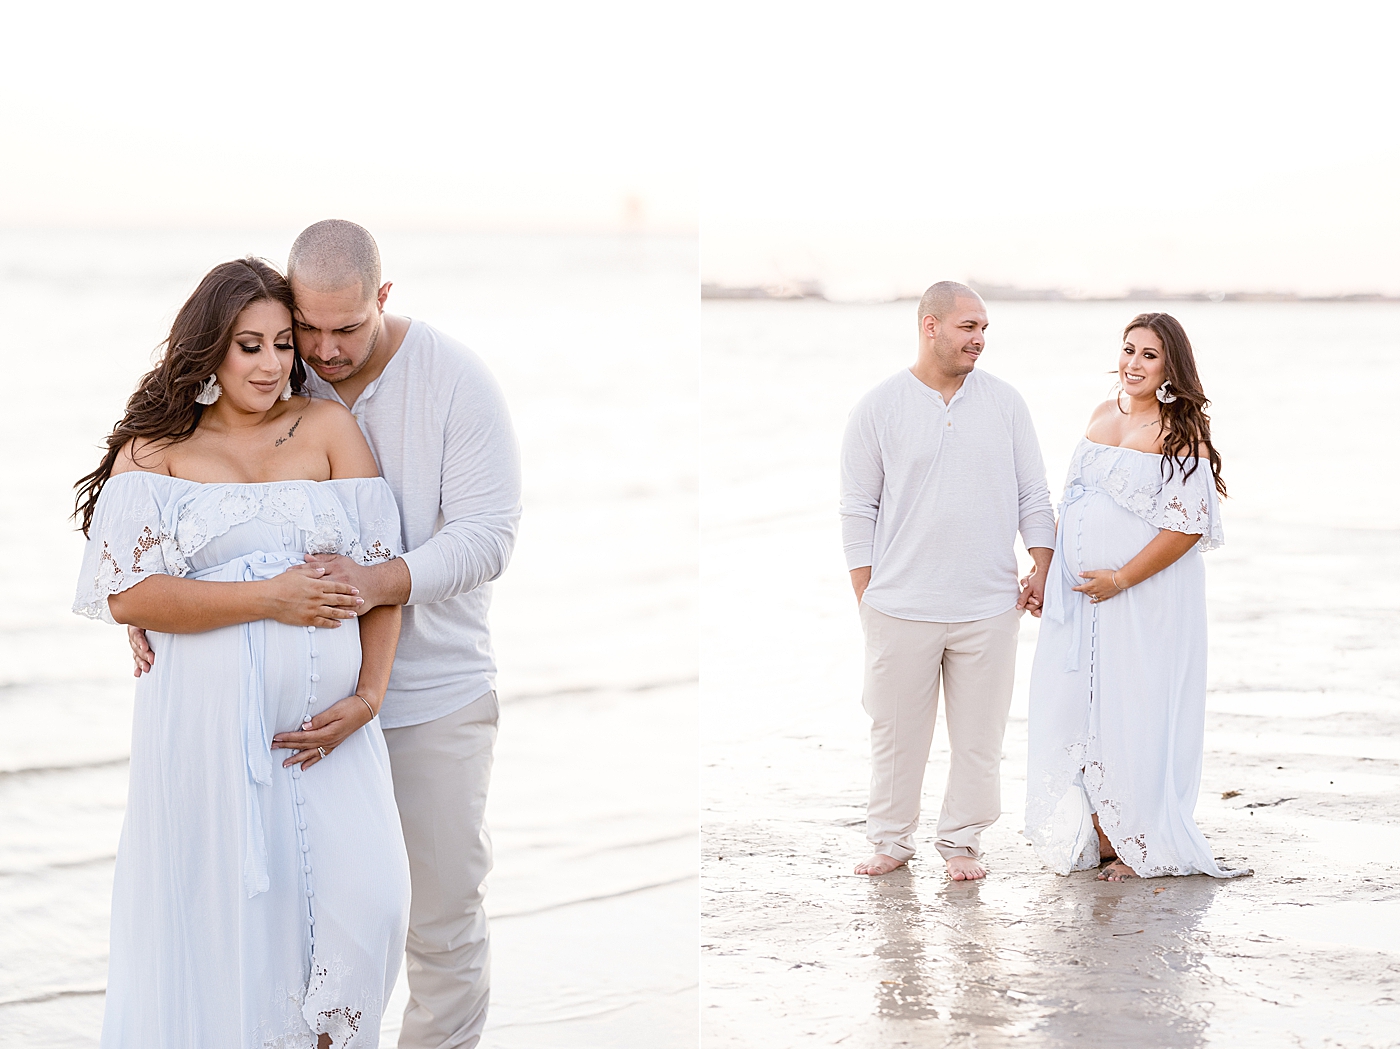 Couple standing in the water for maternity photos at the beach. Photo by Brittany Elise Photography.